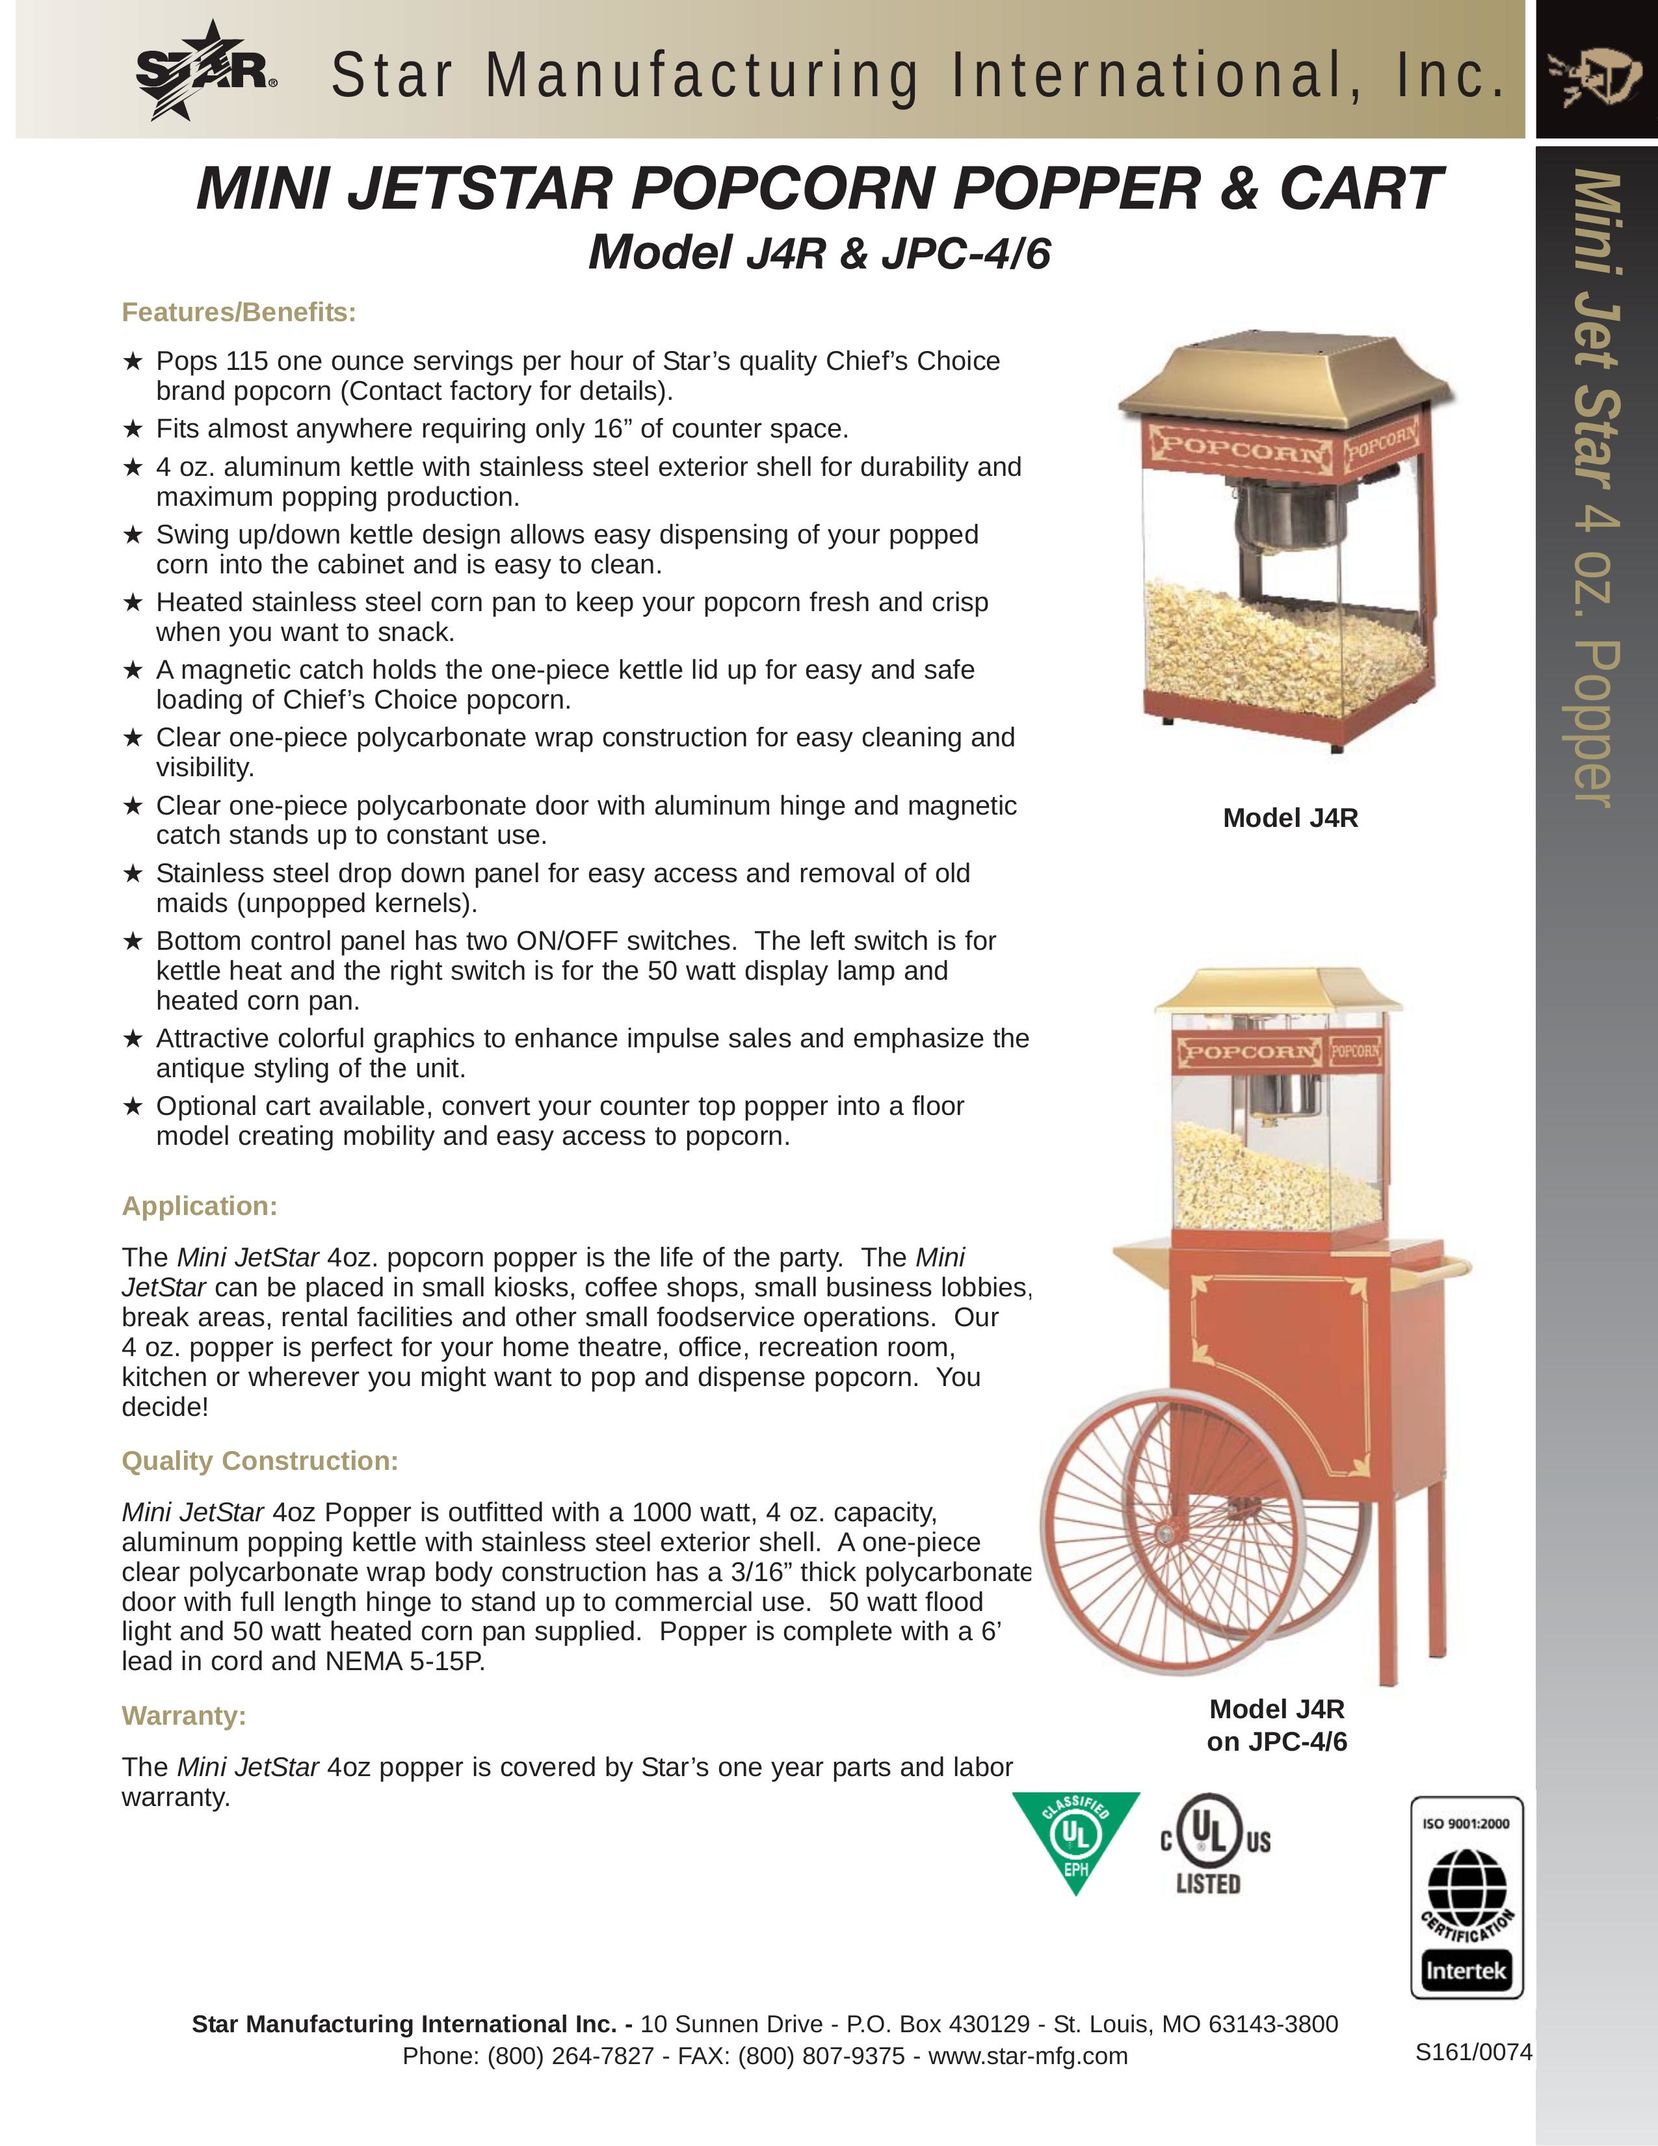 Star Manufacturing J4R Popcorn Poppers User Manual